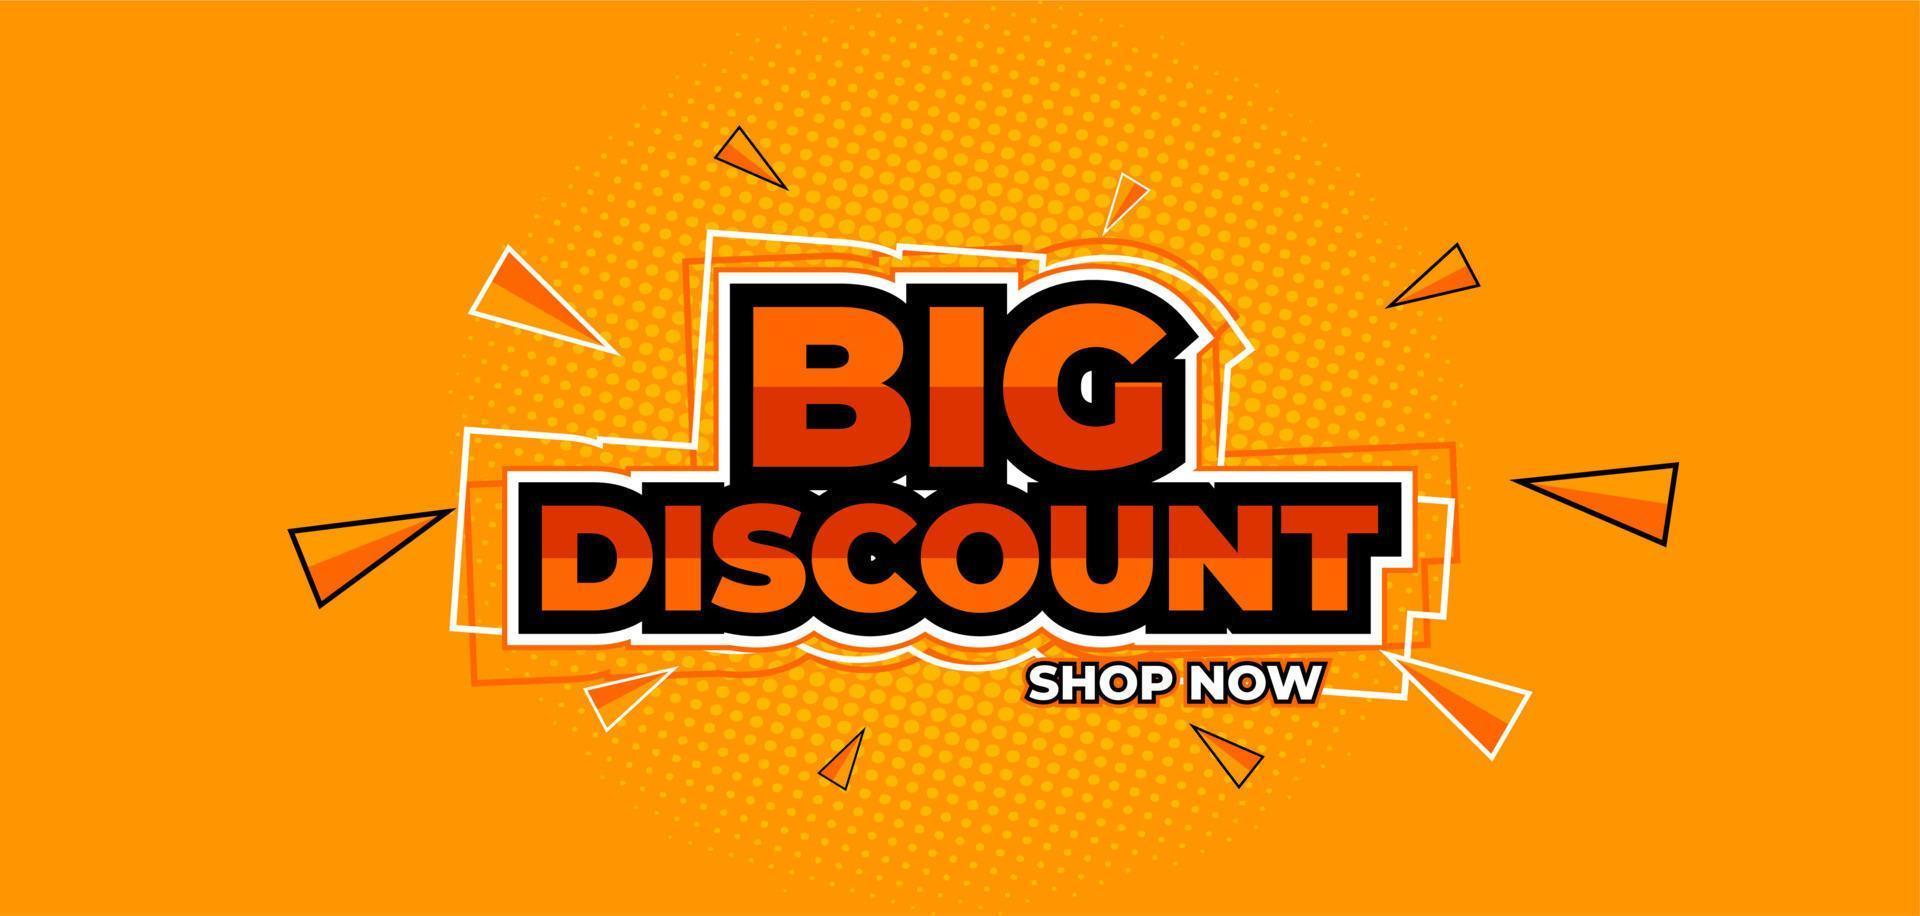 big discount crazy promo yellow abstract sale banner vector